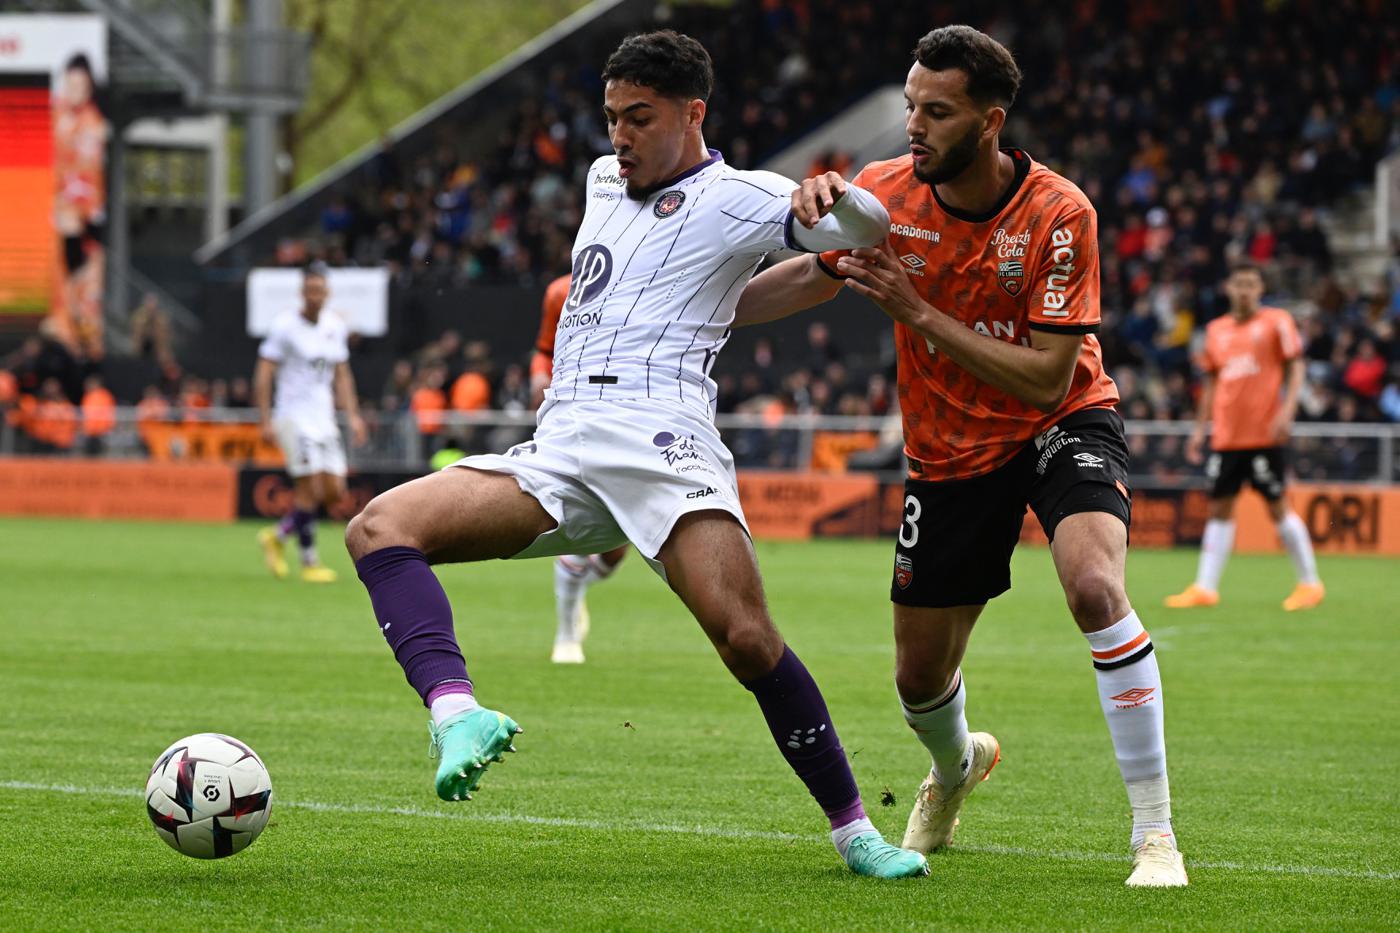 Lorient - Toulouse - 0-1. French Championship, round 32. Match review, statistics.